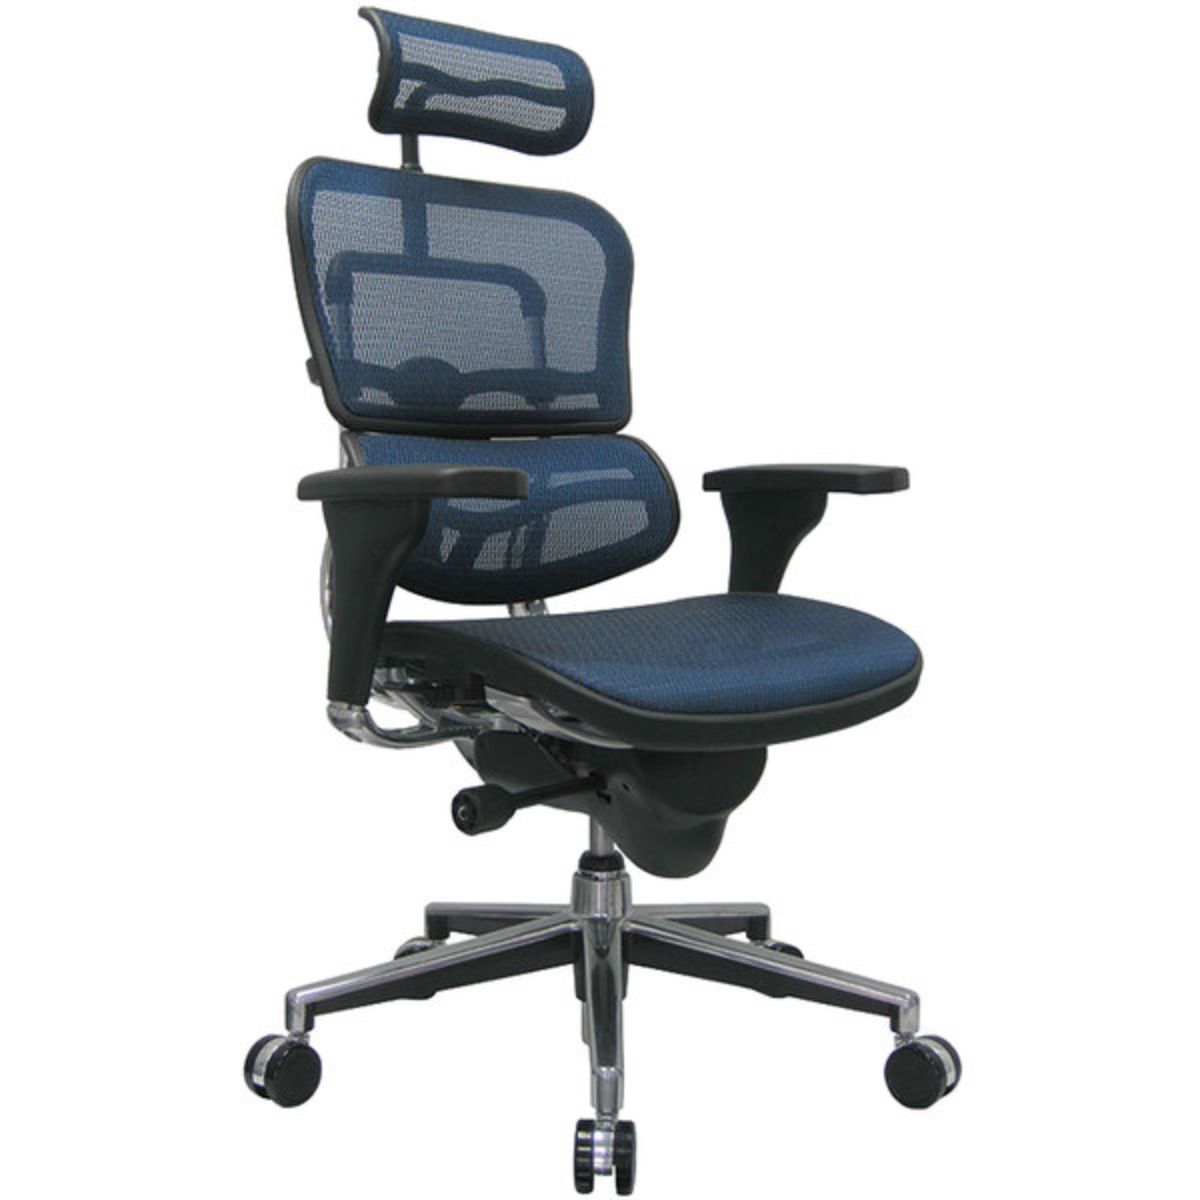 Blue and Silver Adjustable Swivel Mesh Rolling Executive Office Chair-372395-1